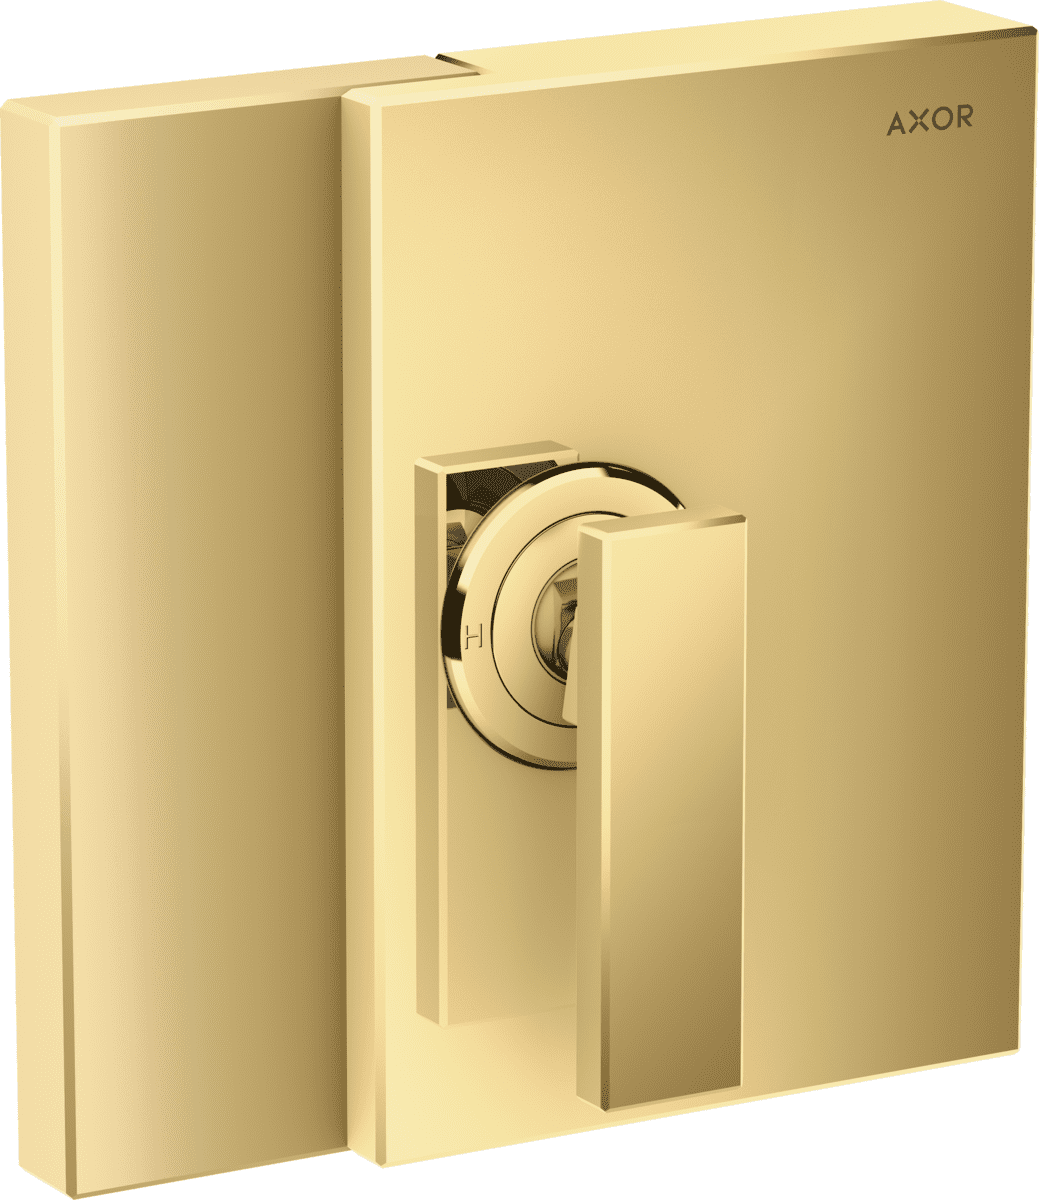 Picture of HANSGROHE AXOR Edge Single lever shower mixer for concealed installation #46650990 - Polished Gold Optic